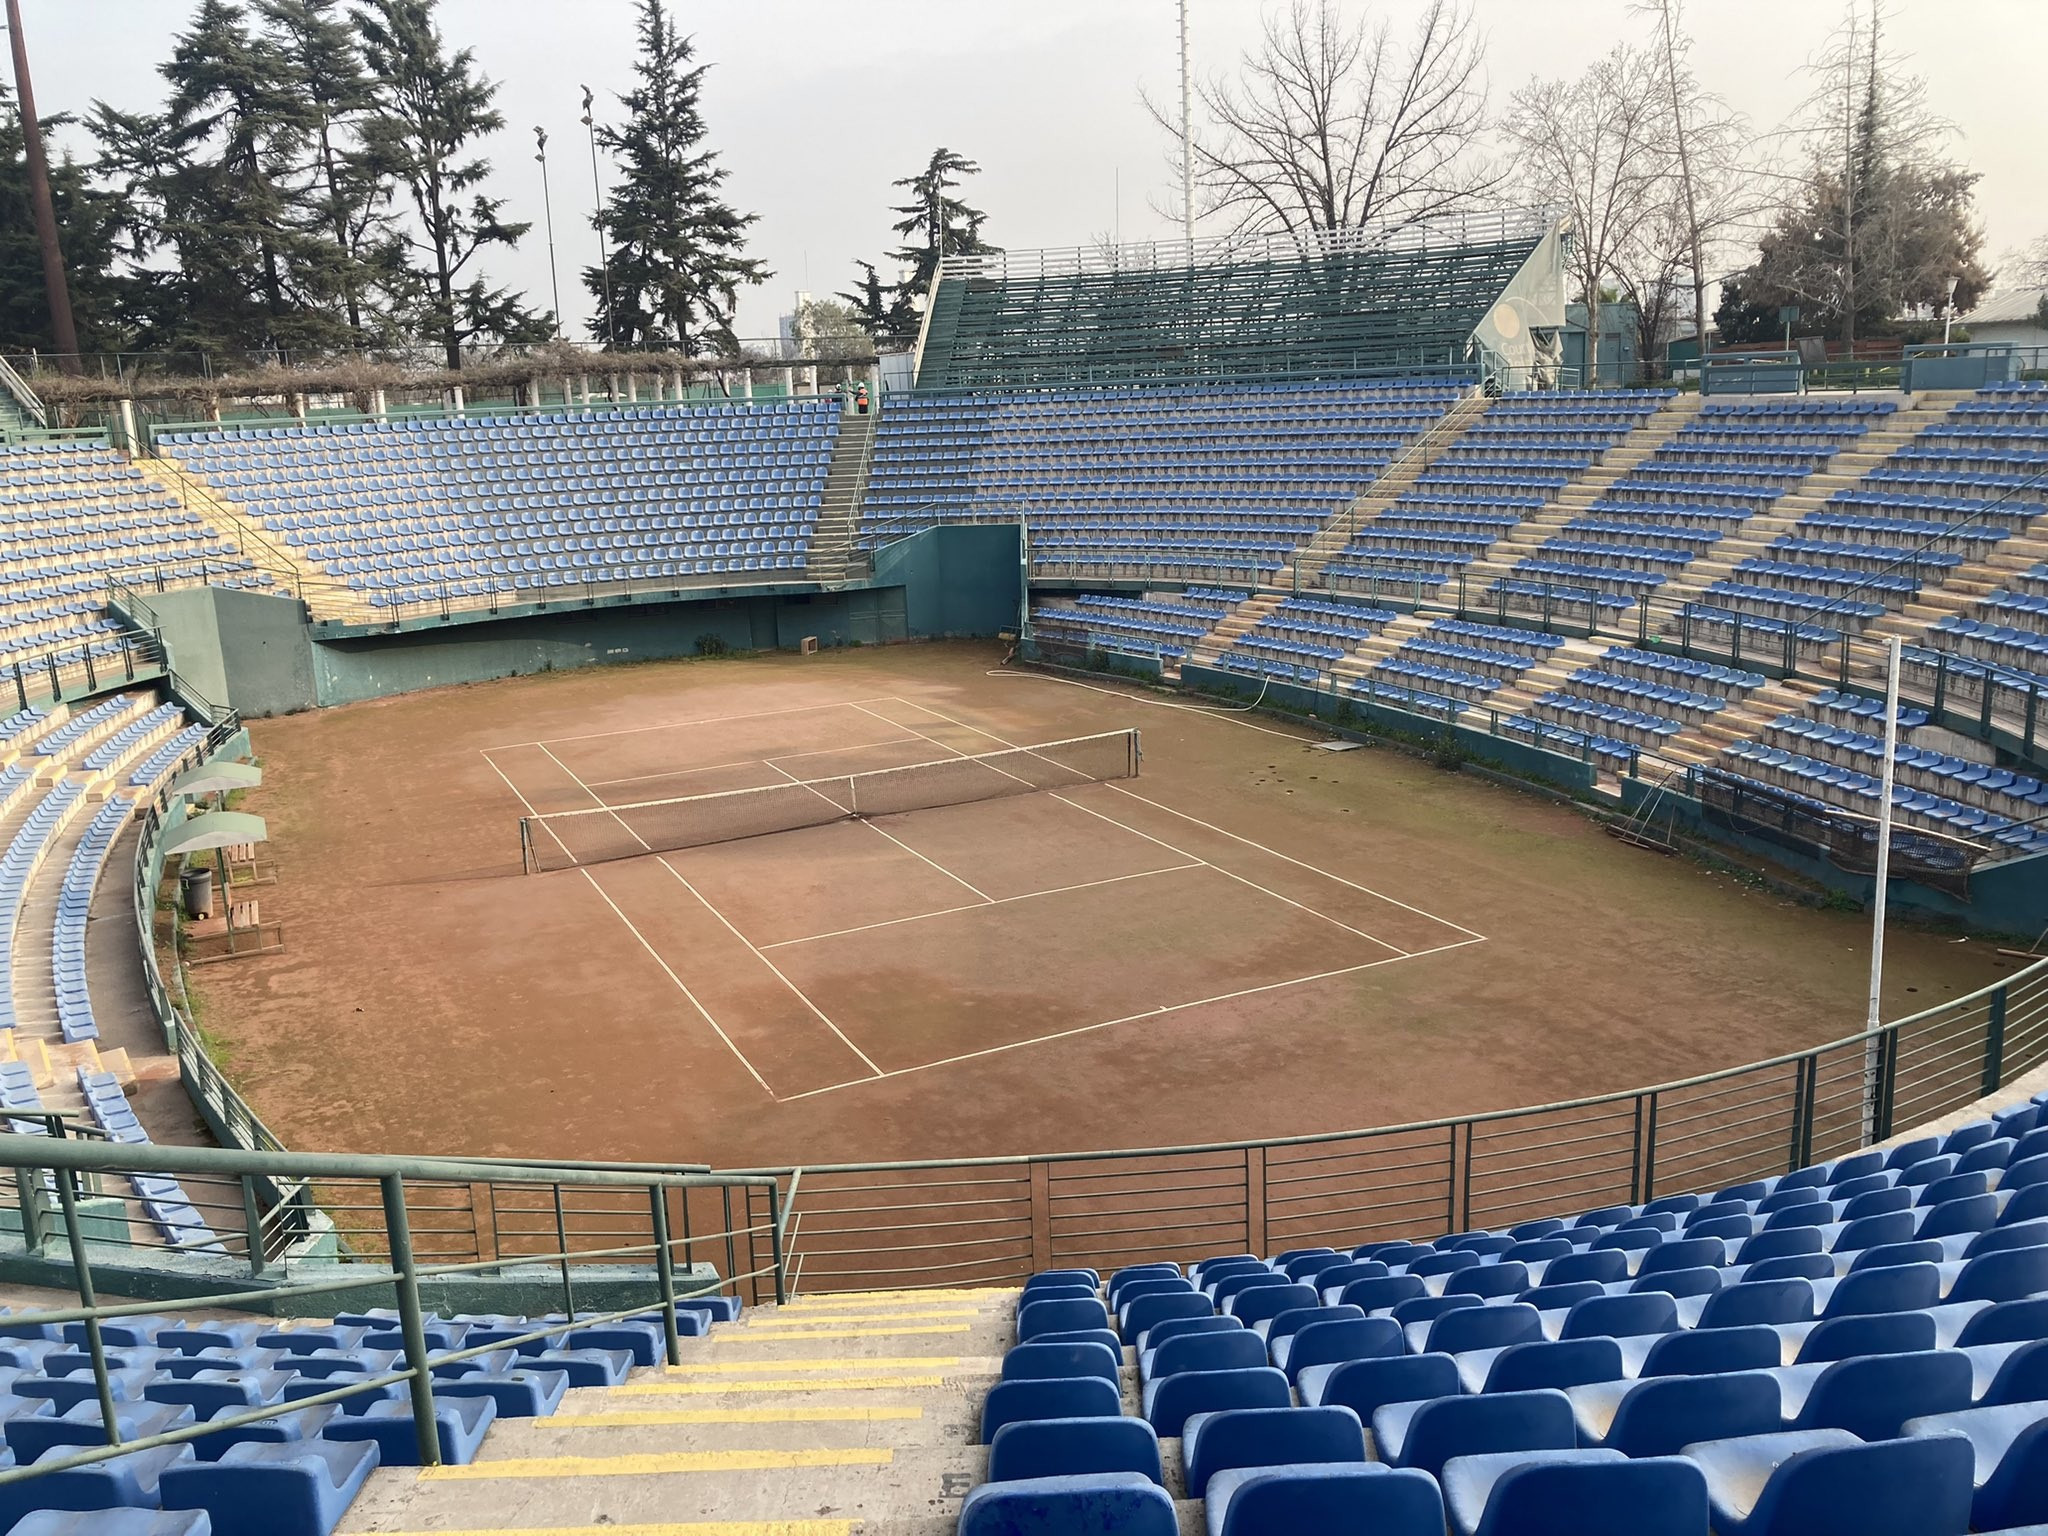 The Court Central Anita Lizana was opened in 1975 and has staged Davis Cup matches ©ITG